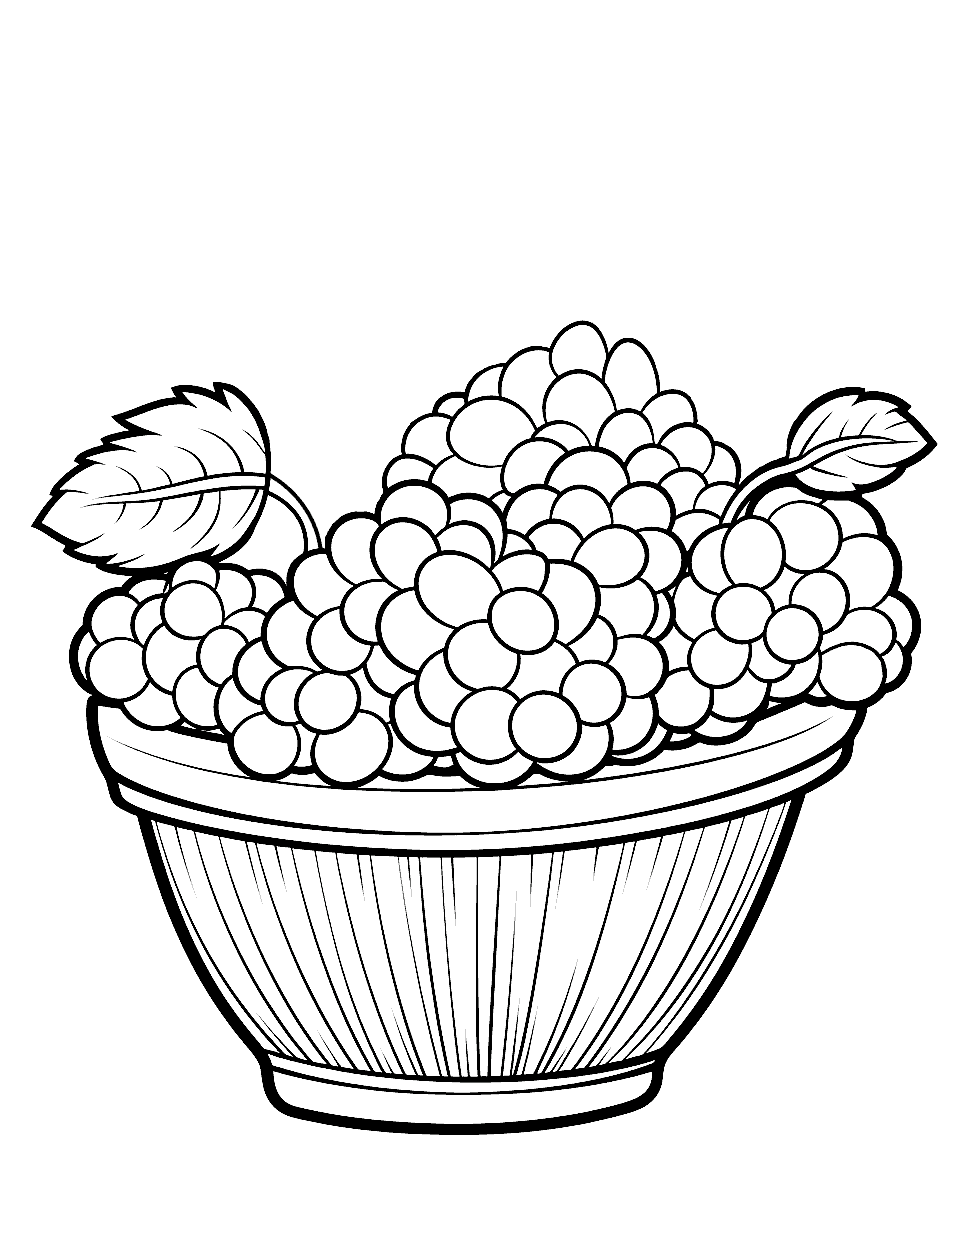 Berry Basket Fruit Coloring Page - A basket filled with lots of berries.